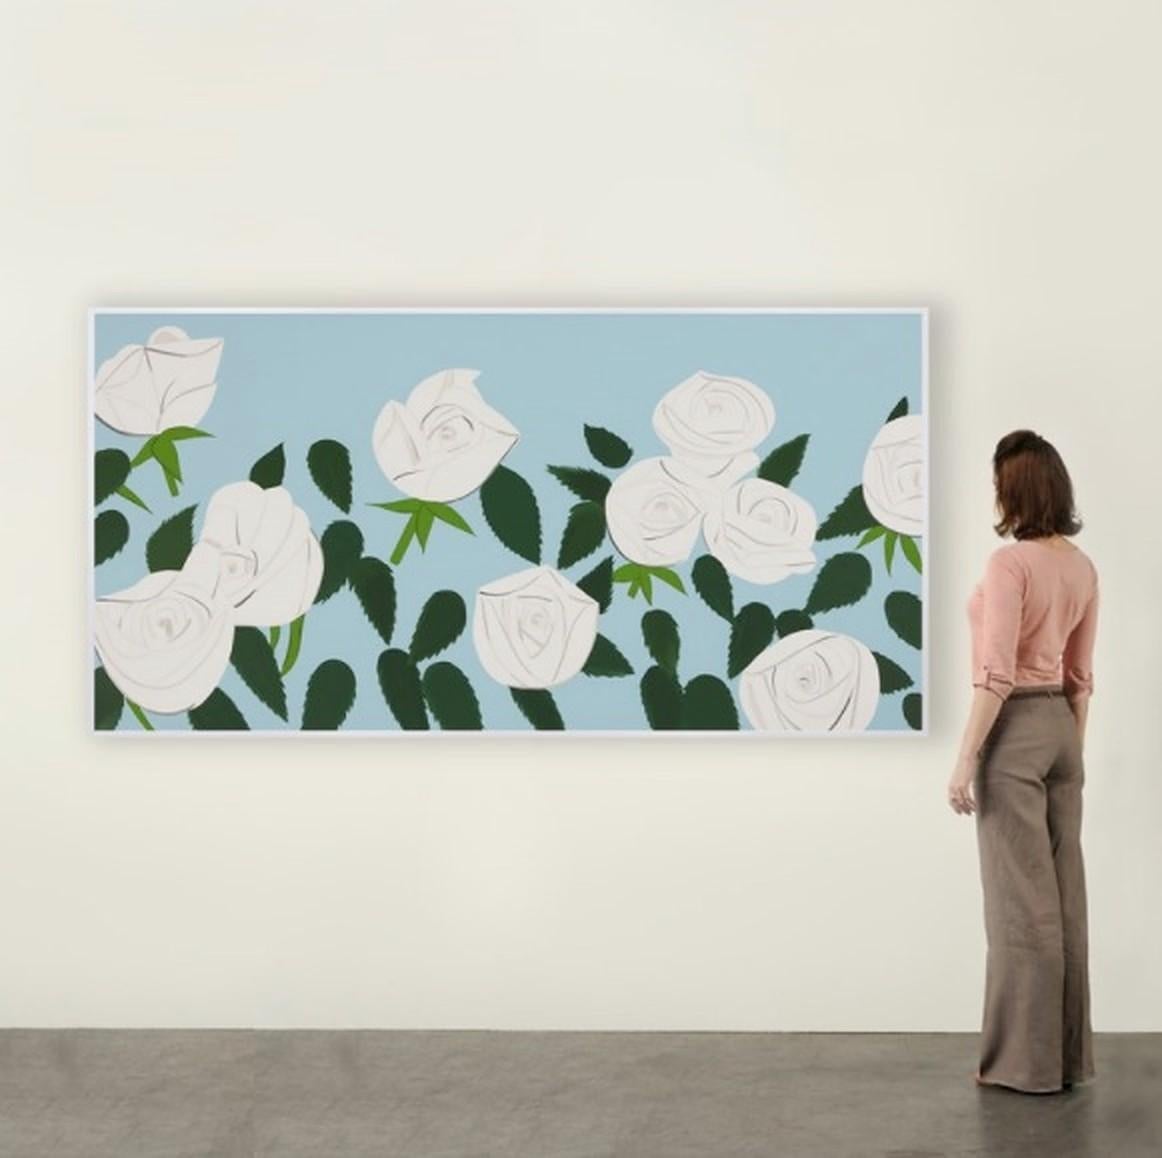 Alex Katz, Yellow Tulips
Contemporary, 21st Century, Silkscreen, Limited Edition
Edition of 50
122,5 x 195,7 cm (48.2 x 77 in.)
Signed and numbered, accompanied by Certificate of Authenticity
In mint condition, as acquired from the